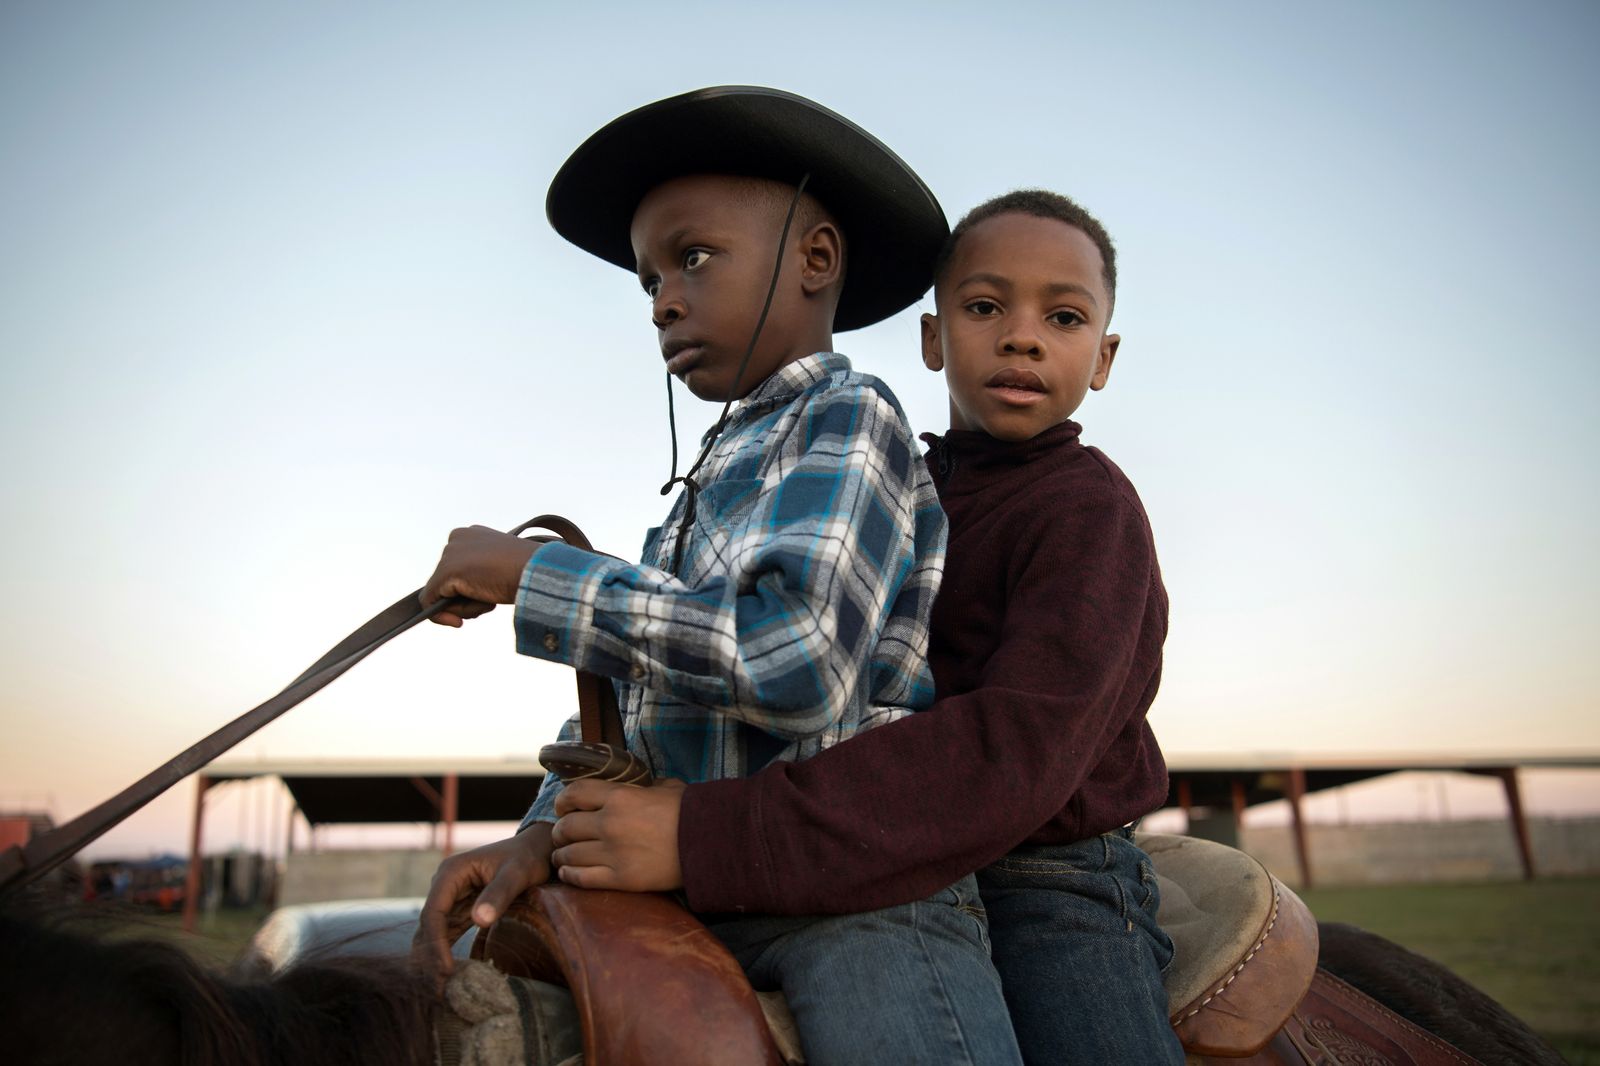 © Rory Doyle - D’Kamiyon Johnson, left, and Carlos Smith share a horse outside a rodeo in Greenville, Mississippi Oct. 27, 2018.